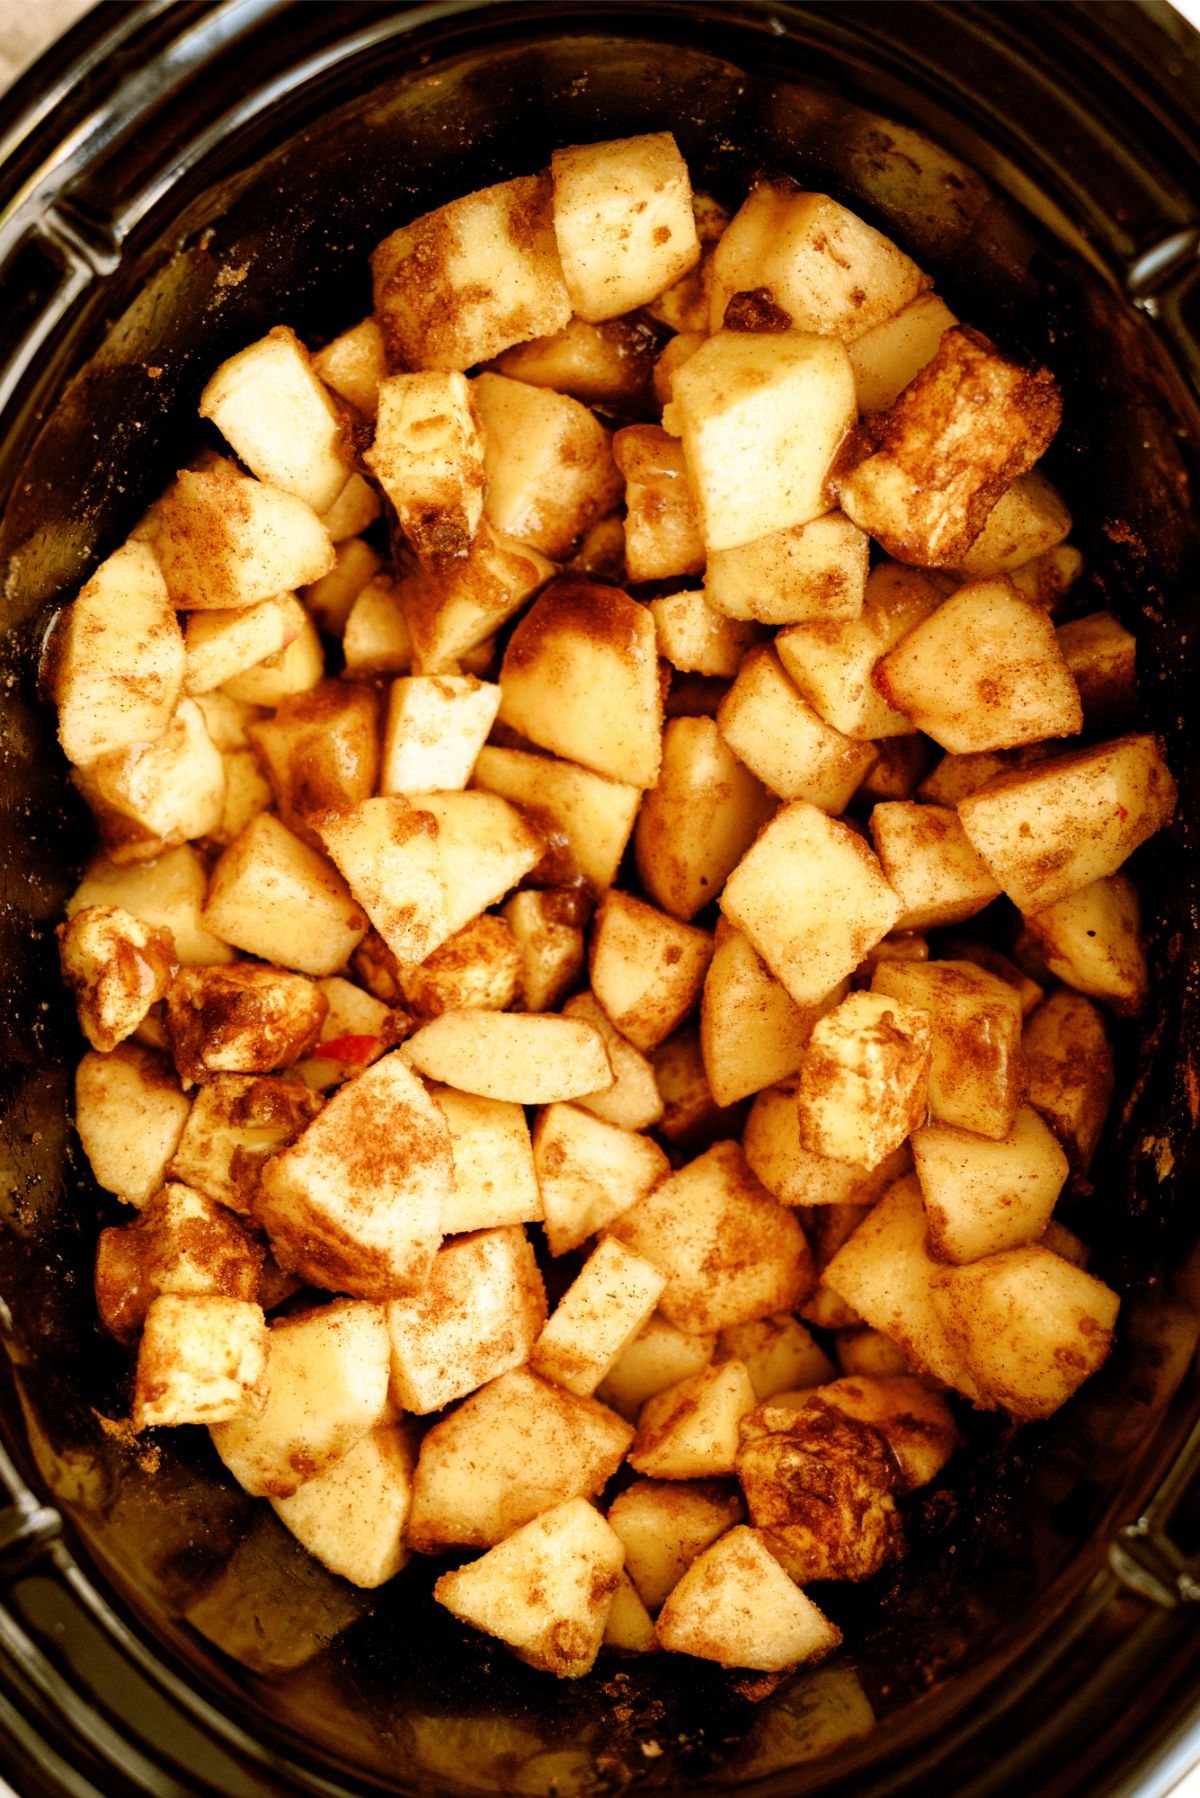 Cubed apples in the slow cooker, seasoned and ready to cook